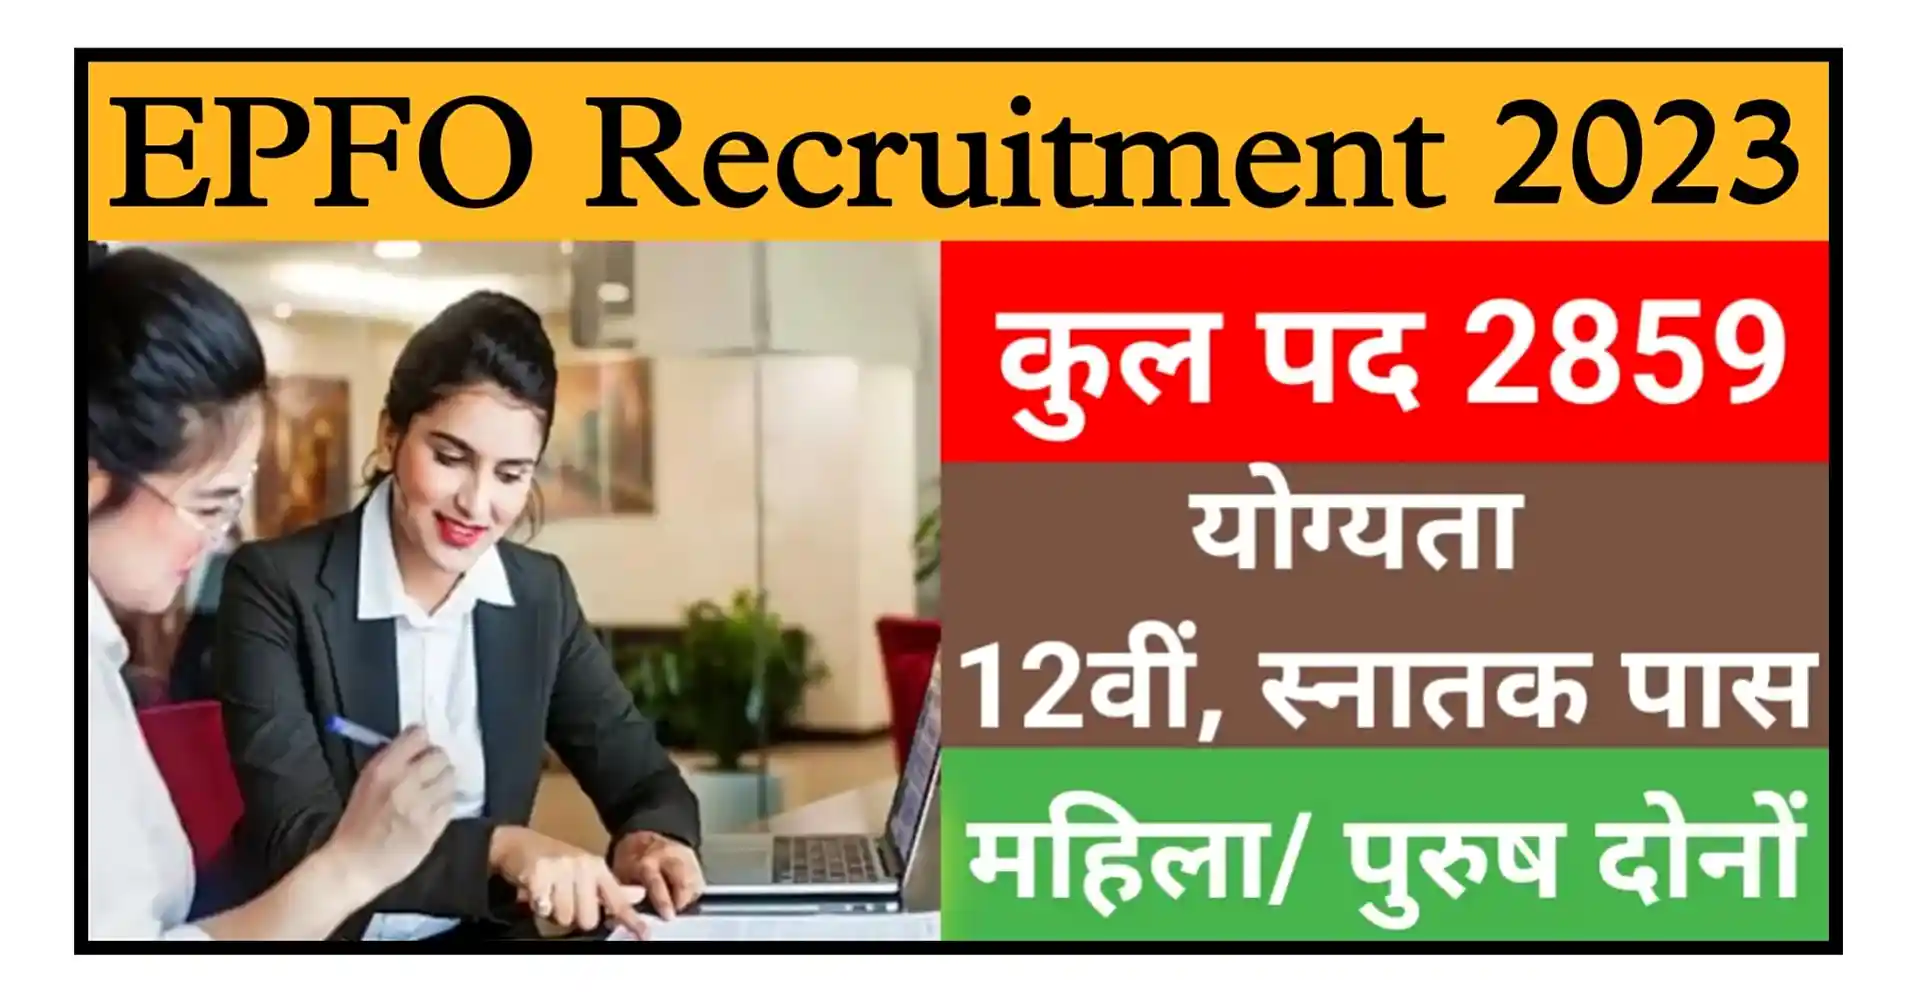 EPFO Recruitment 2023 Notification, Apply Online For SSA And Stenographer Posts, Check All Details